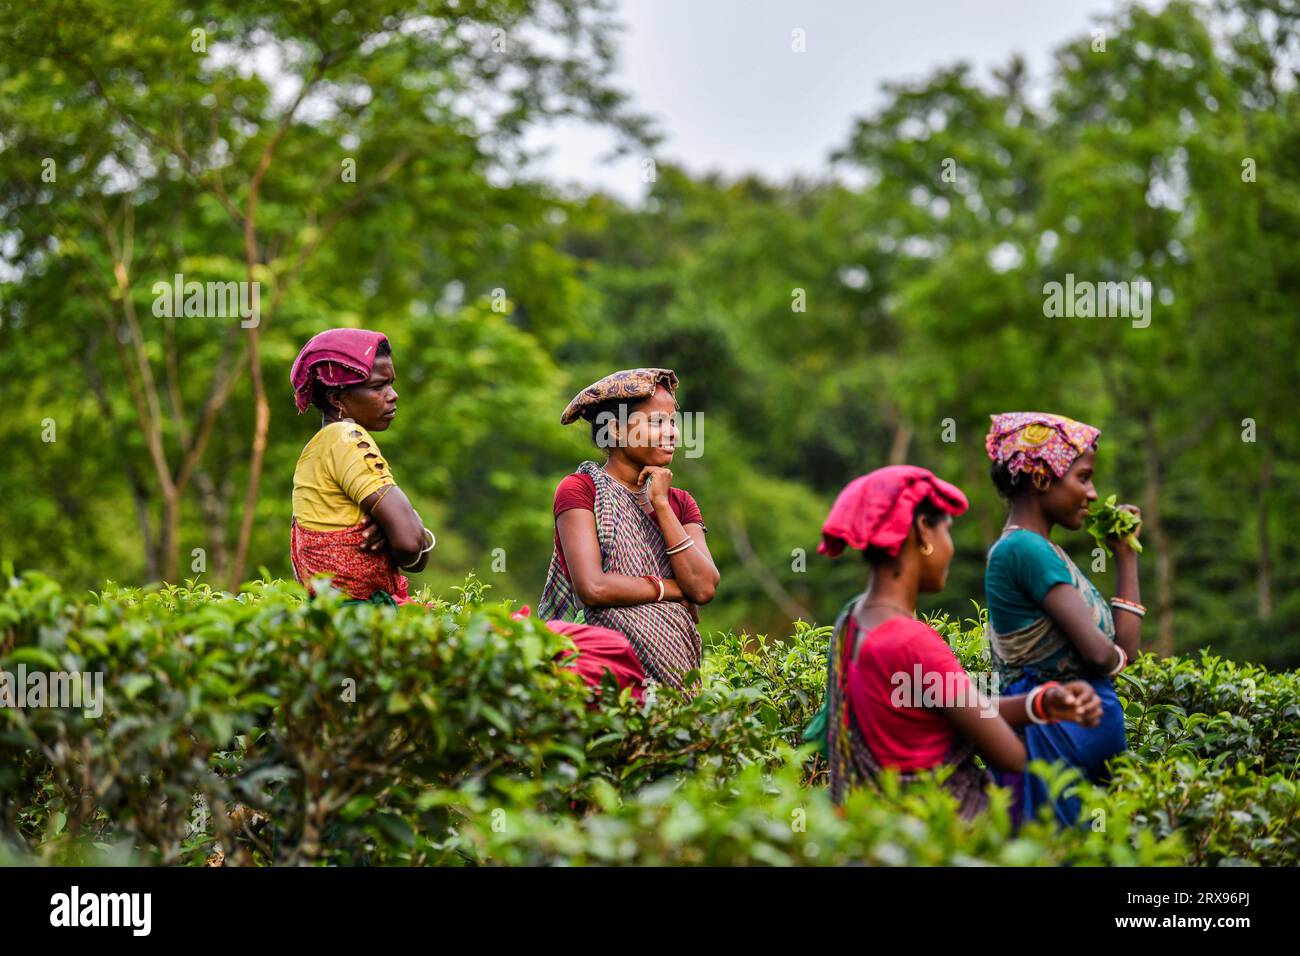 Bangladeshi woman's plucking tea leaves at a tea garden in Sylhet. Tea Plucking is a specialized skill. Two leaves and a bud need to be plucked in order to get the best taste and profitability. The calculation of daily wage is 170tk(1.60$) for plucking at least 22-23 kg leaves per day for a worker. The area of Sylhet has over 150 gardens including three of the largest tea gardens in the world both in area and production. Nearly 300,000 workers are employed on the tea estates of which over 75% are women but they are passing their lives as a slave. Stock Photo